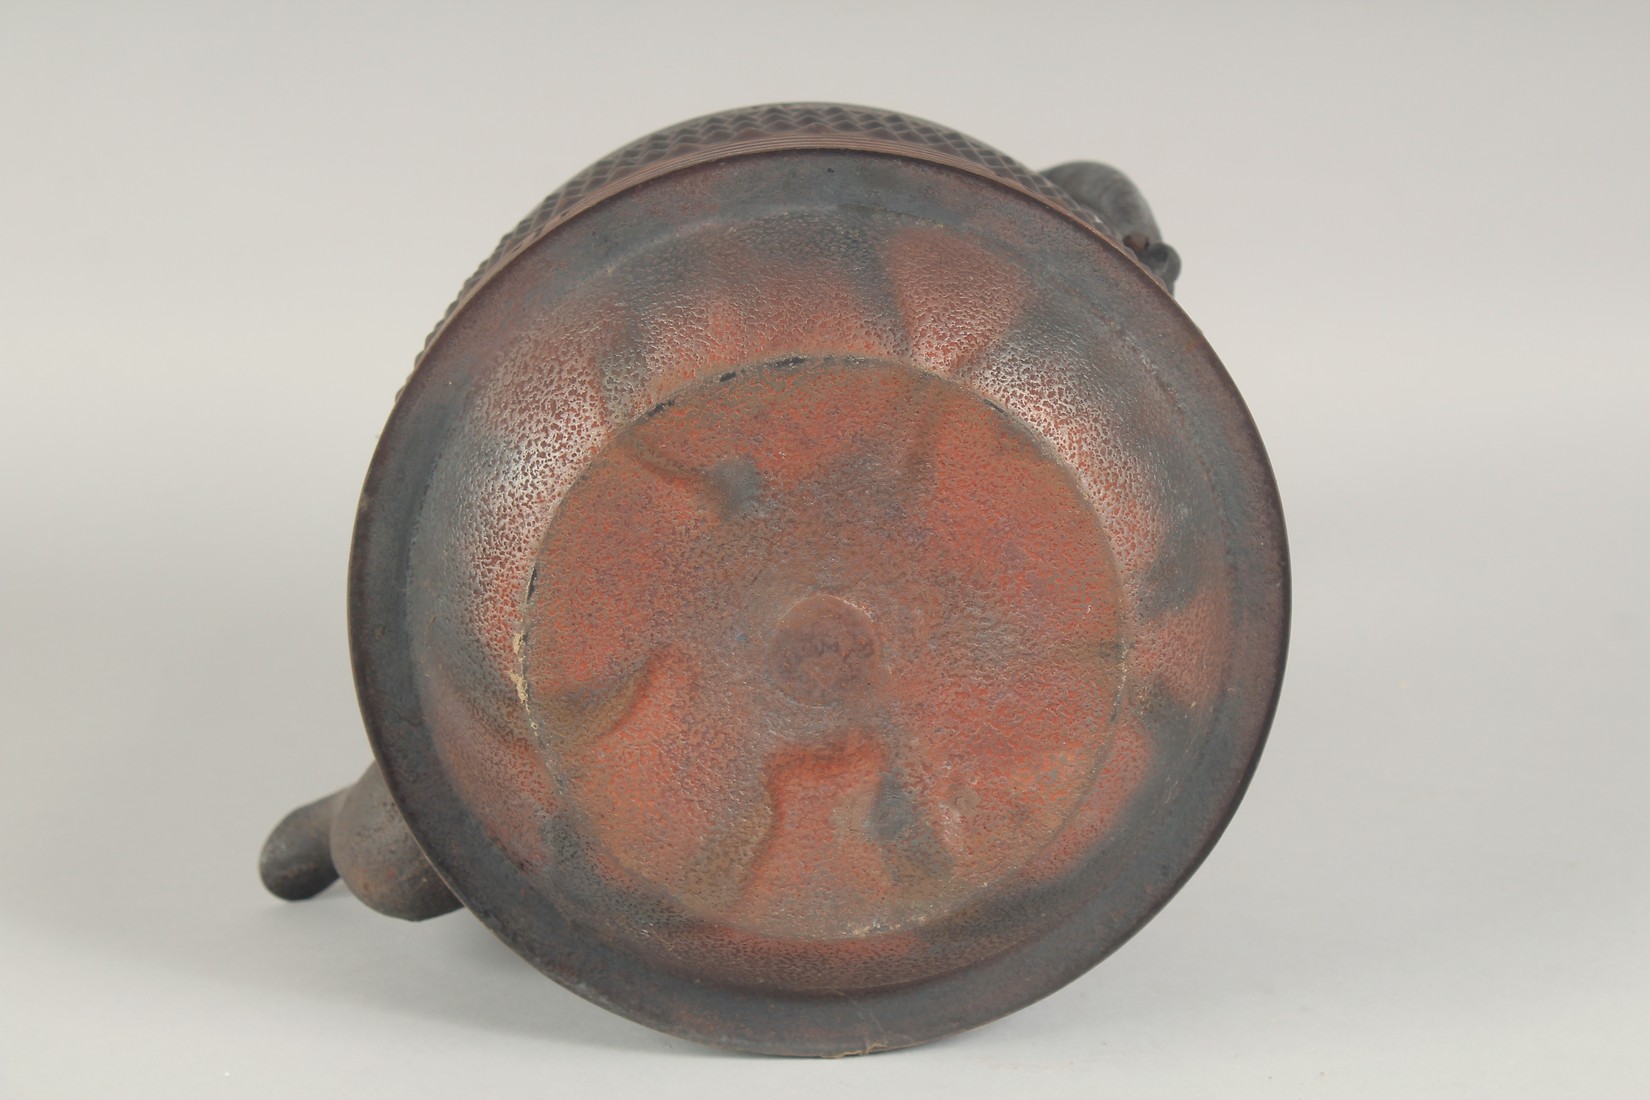 A LARGE 19TH CENTURY JAPANESE CAST IRON TETSUBIN / KETTLE, designed with bands of raised bosses, - Image 6 of 6